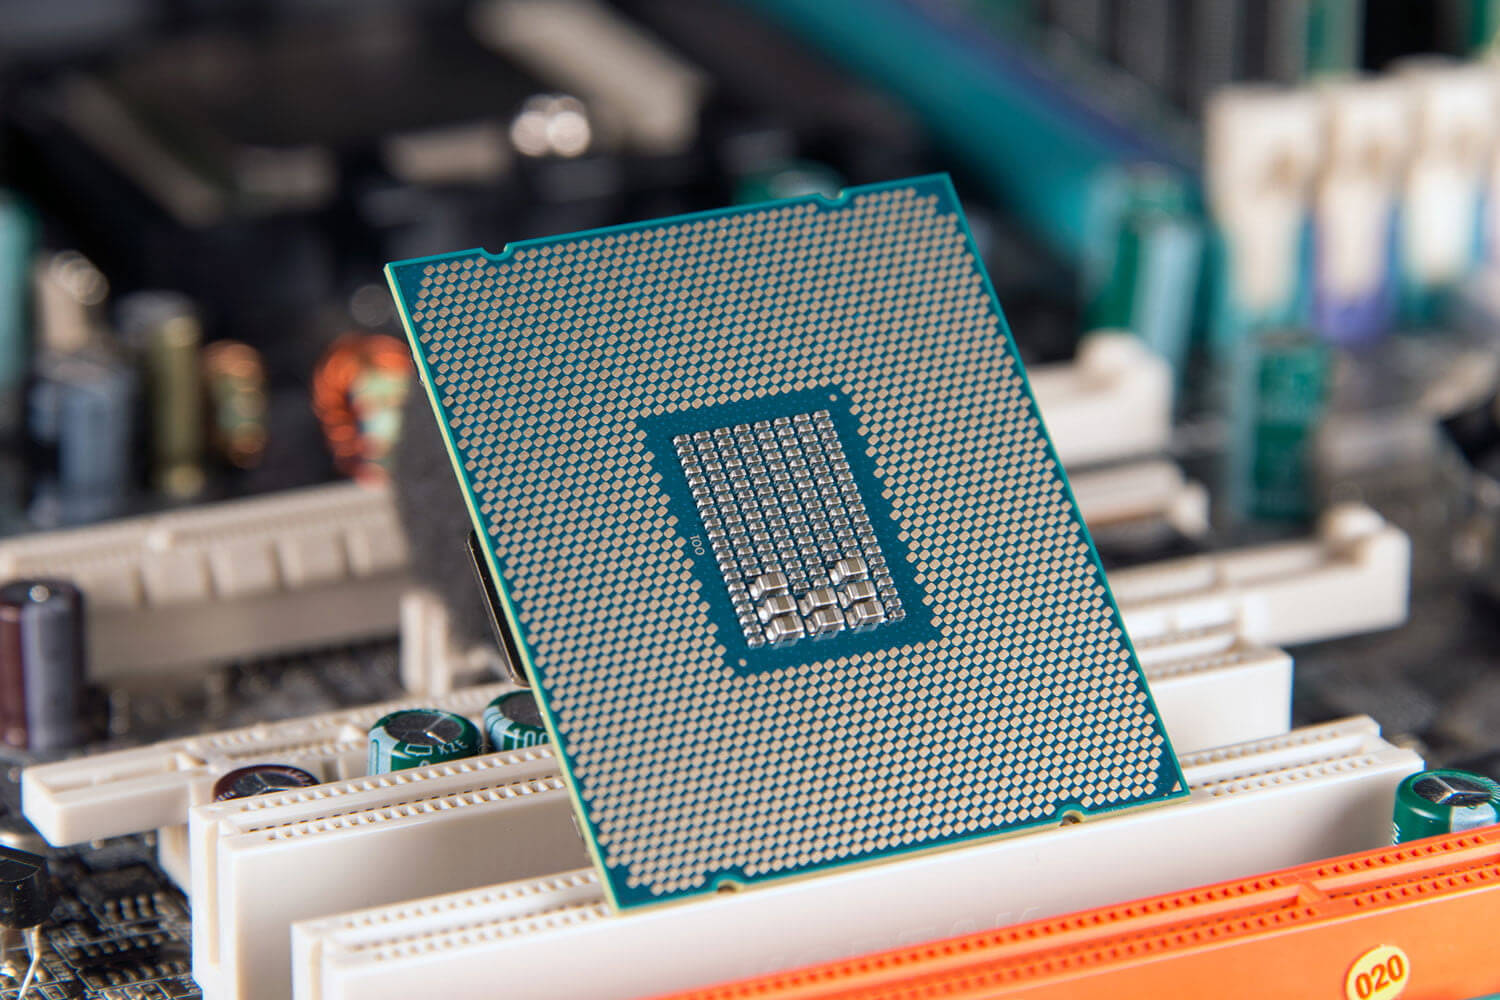 Intel 8th generation and 9th generation CPU list leaked, includes Core i9 mobile processor